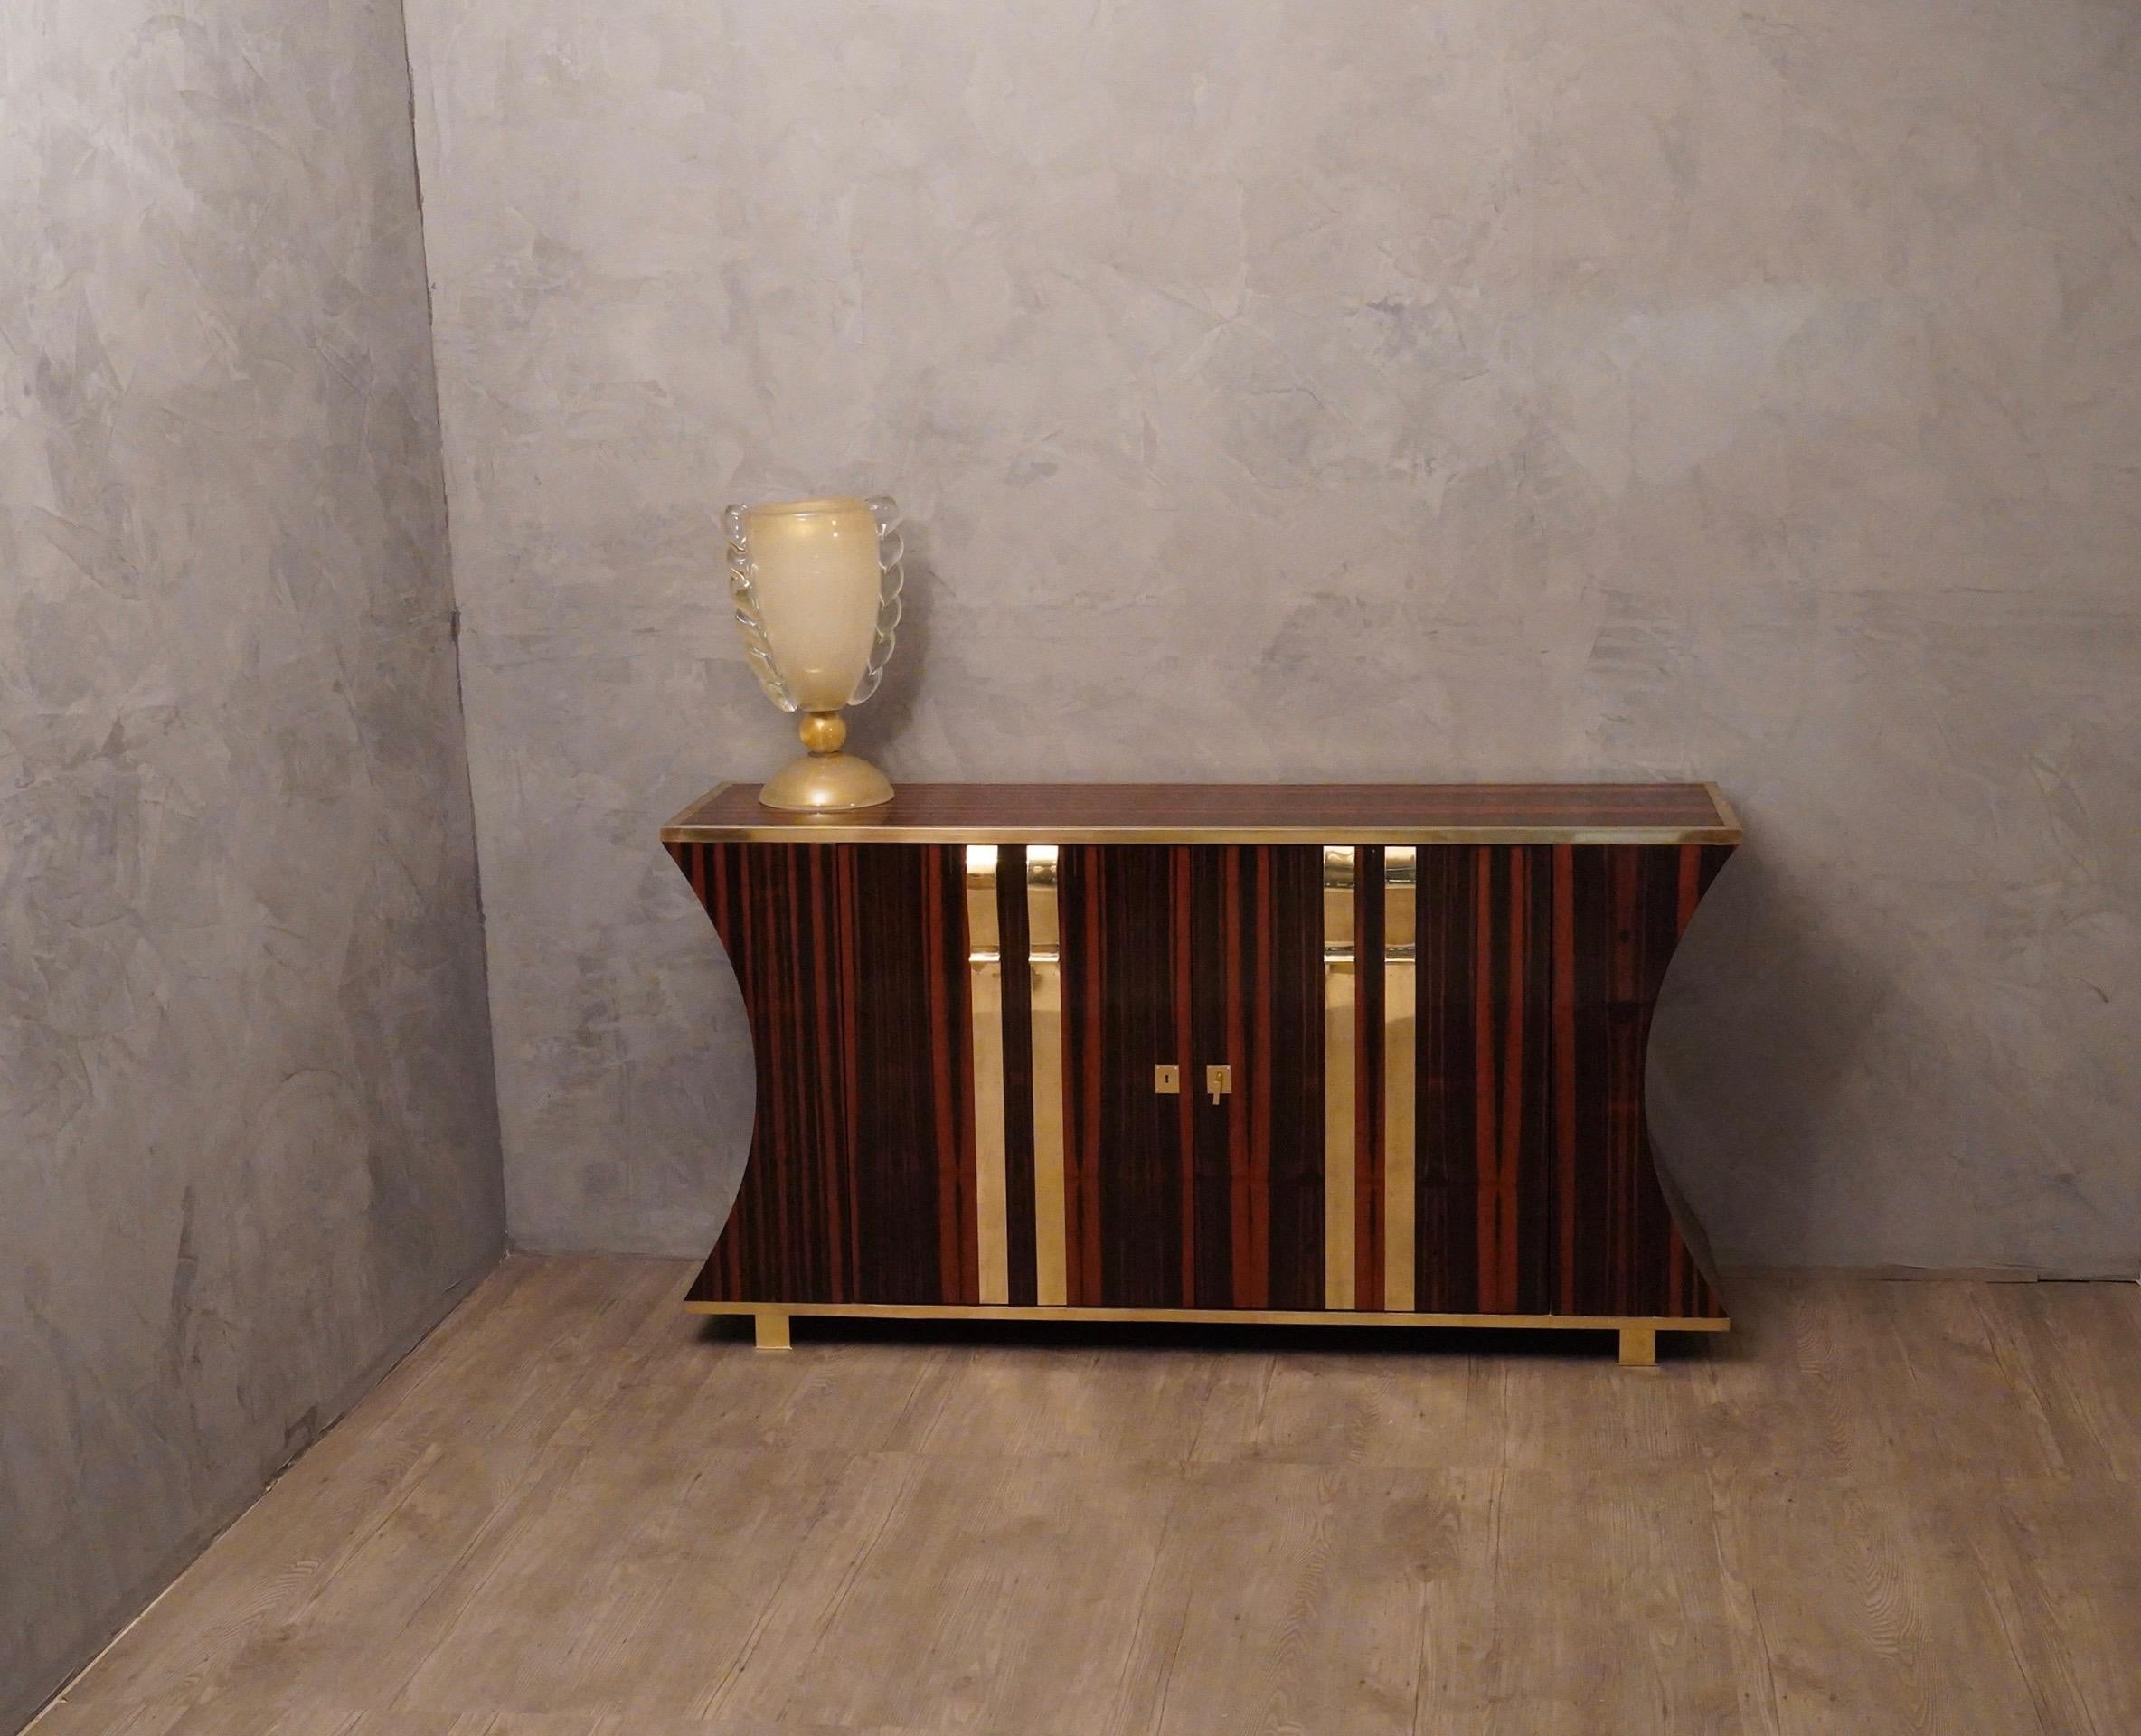 Superb sideboard with a purely Italian character, in the style of Paolo Buffa, Vittorio Dassi and Osvaldo Borsani. Also due to the fine selection of materials.

All veneered in Macassar wood, but with borders along the top and base in polished